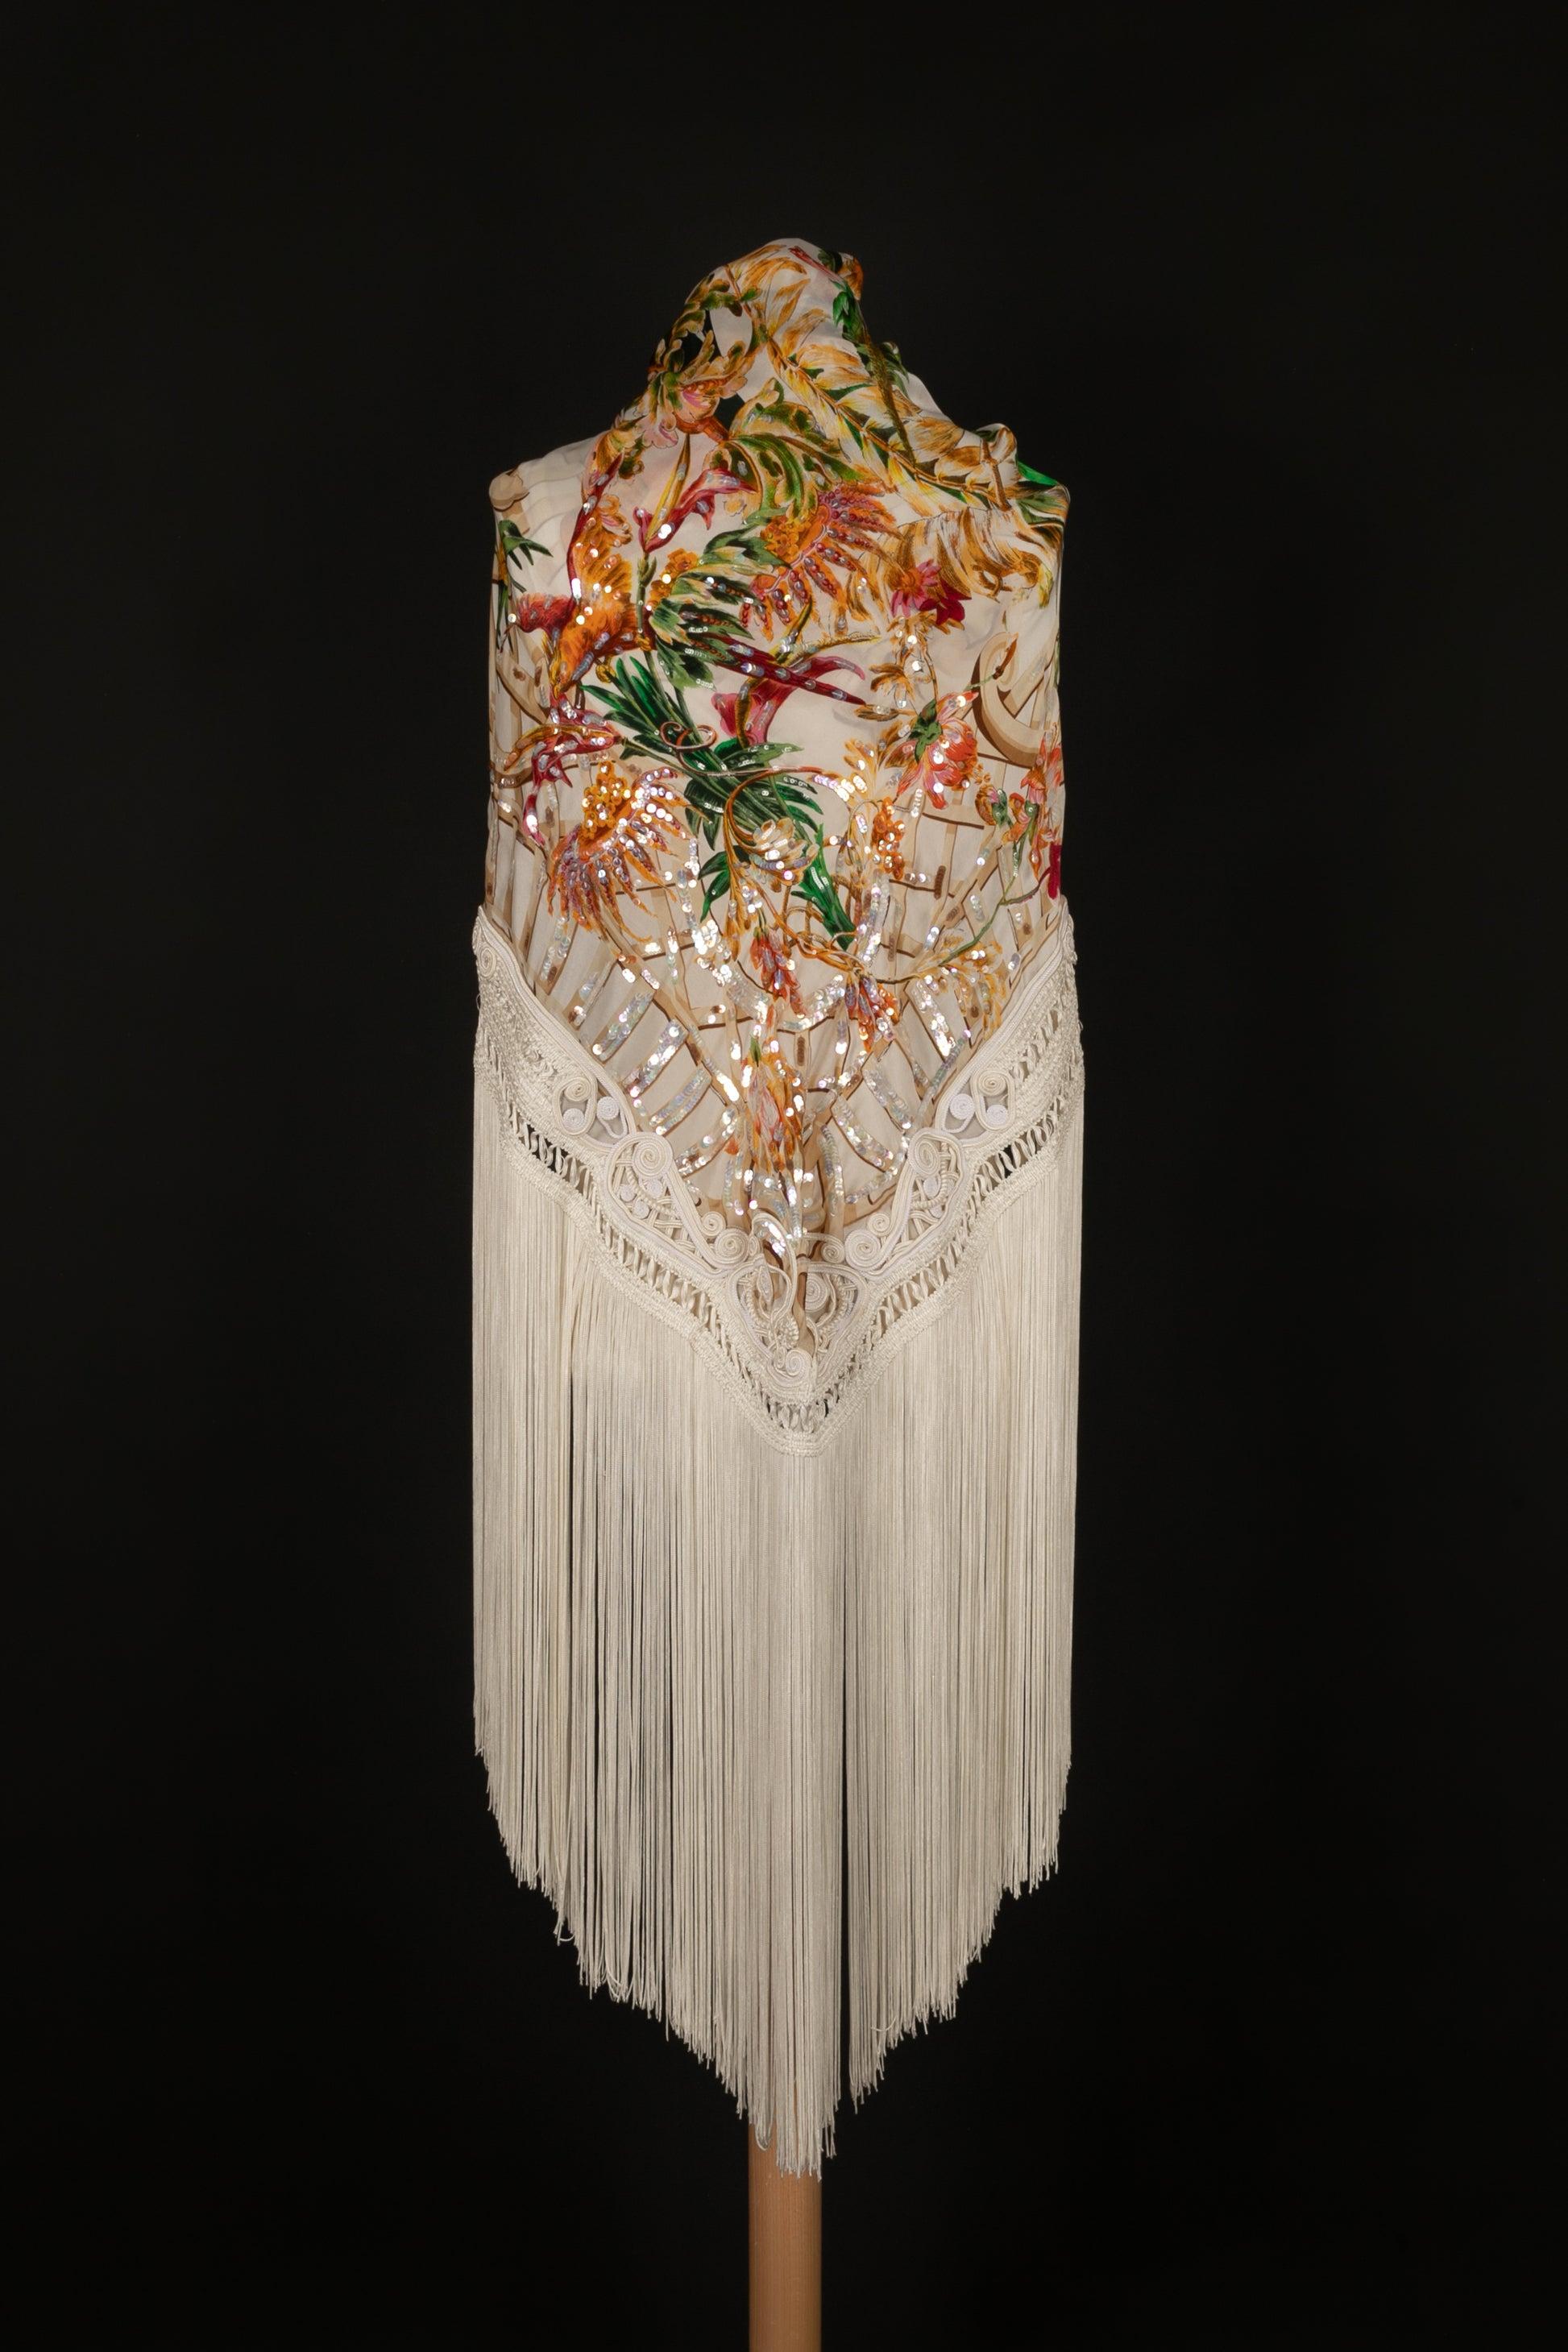 Dior - Very large silk stole sewn with sequins and edged with fringes and a trimmings decoration. The composition label was cut. Piece designed under the artistic direction of Gianfranco Ferré.

Additional information:
Condition: Very good